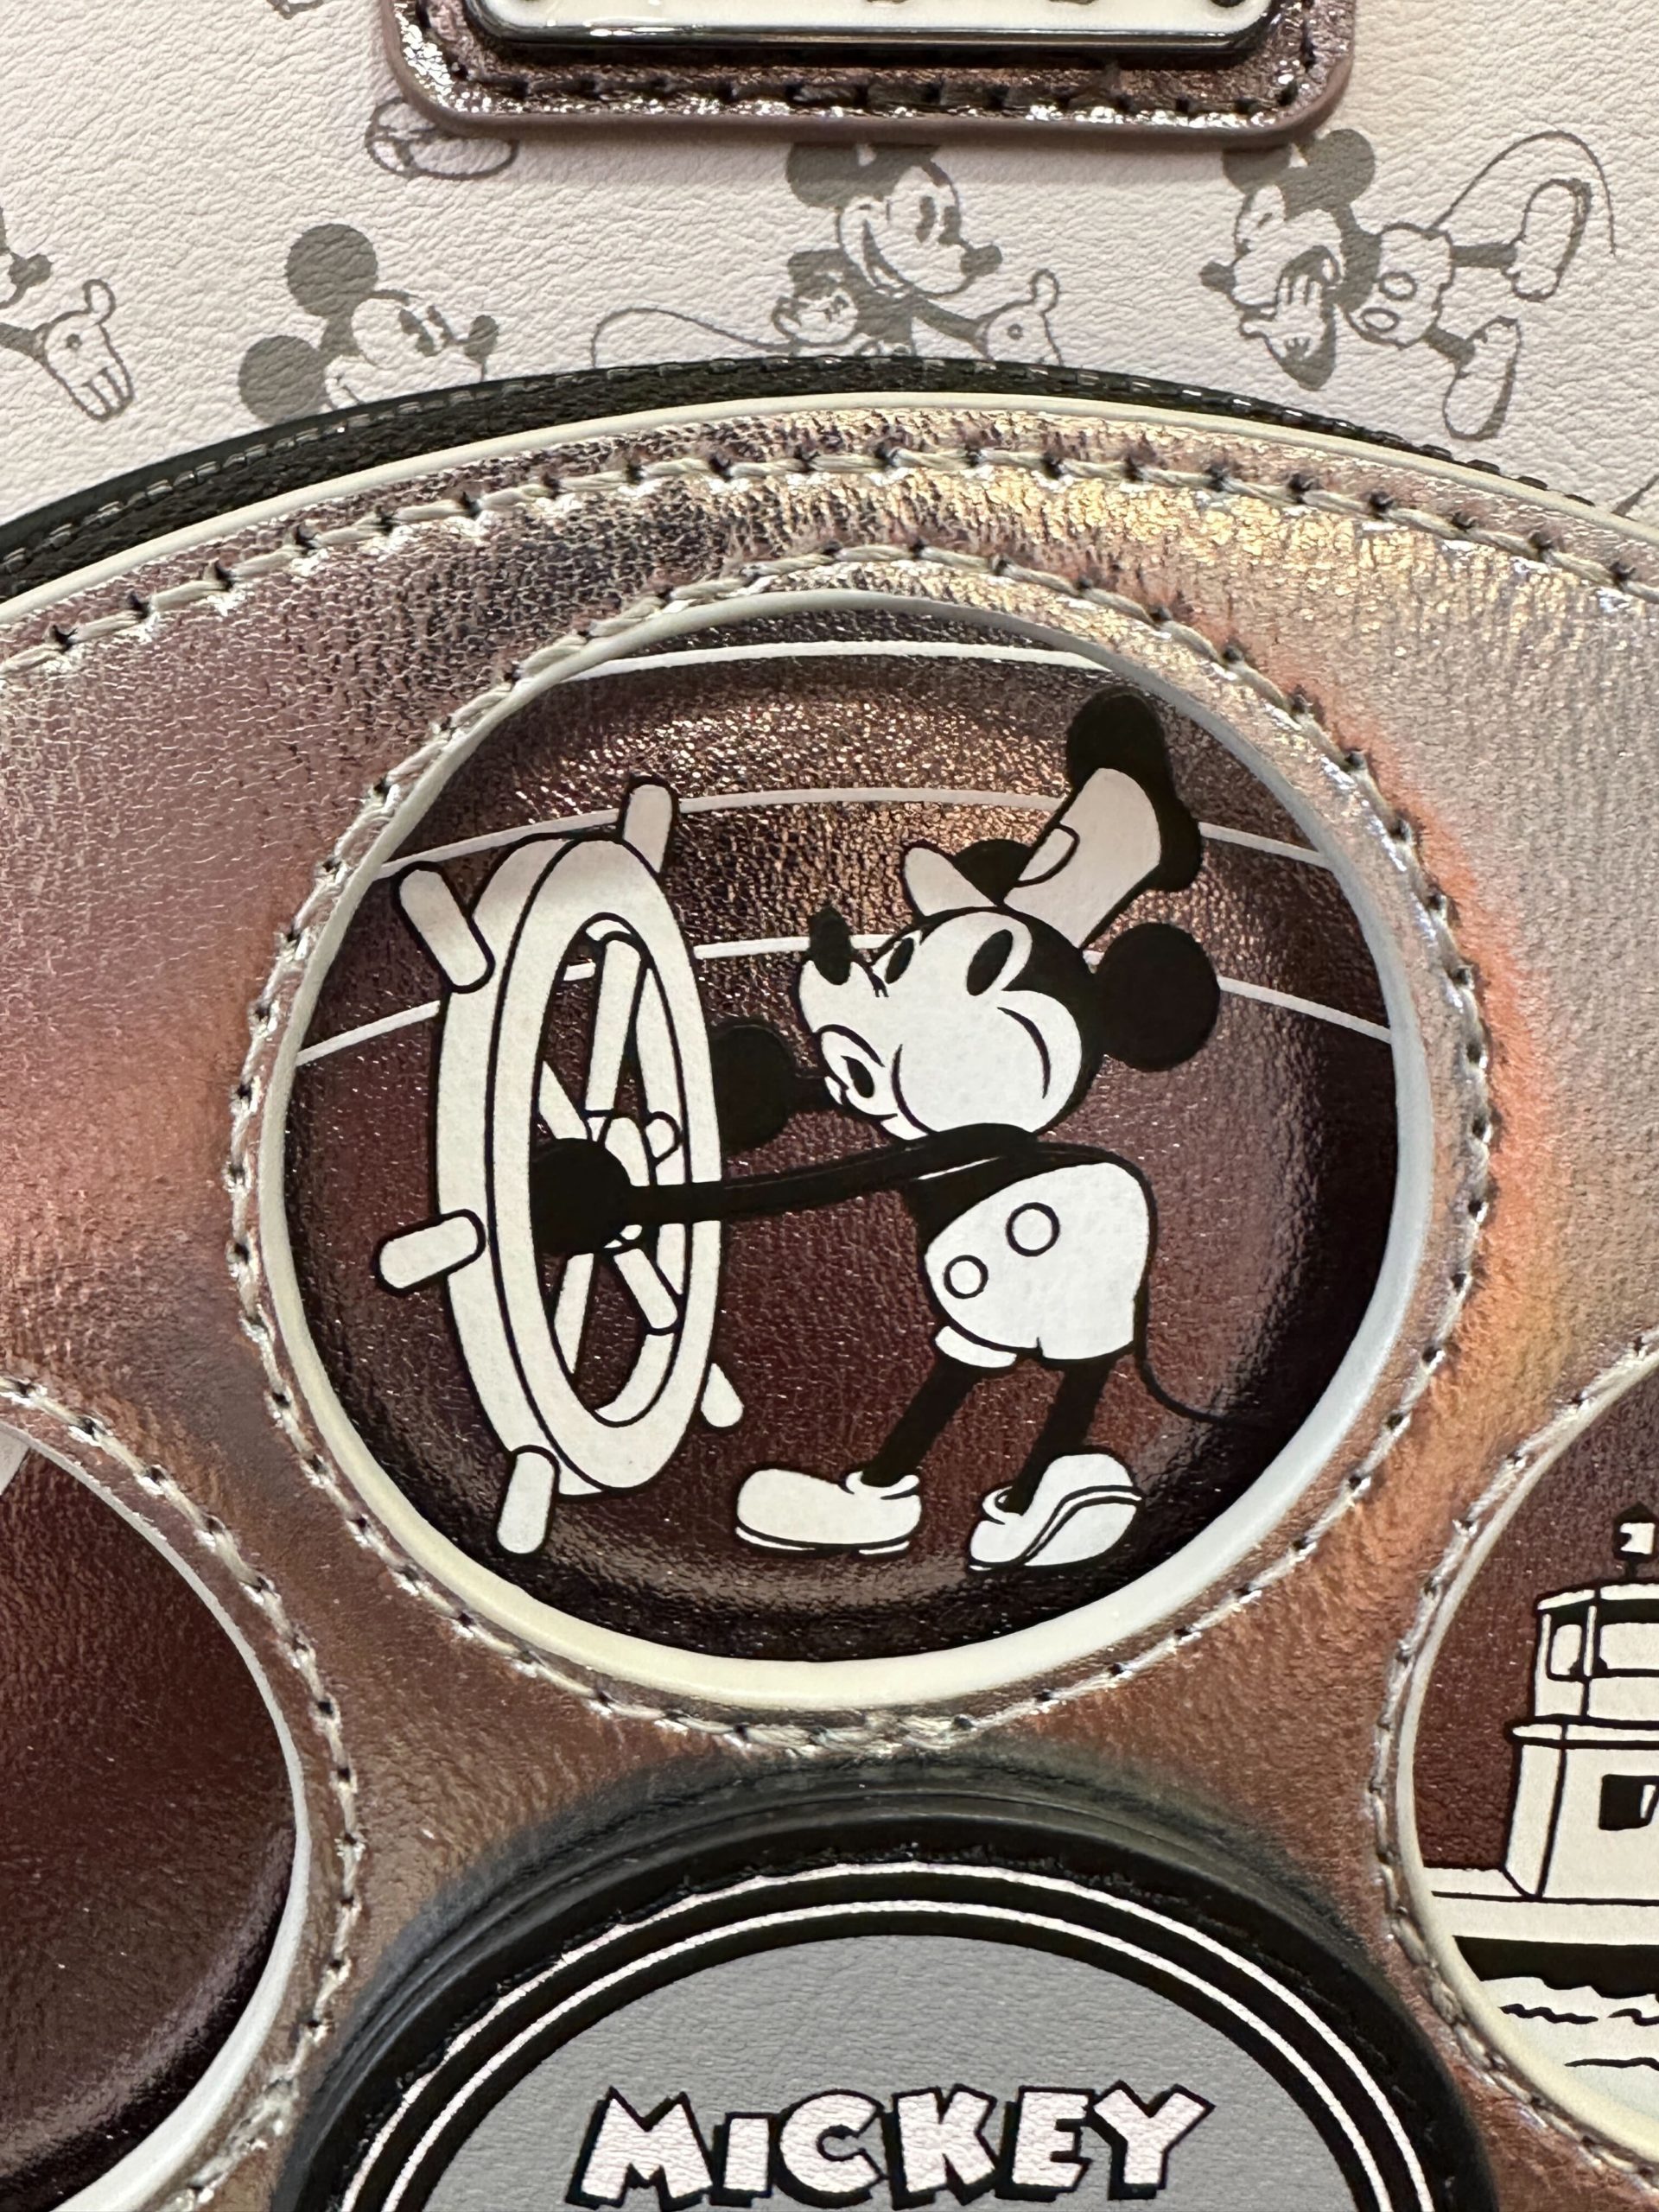 Loungefly Steamboat Willie Backpack